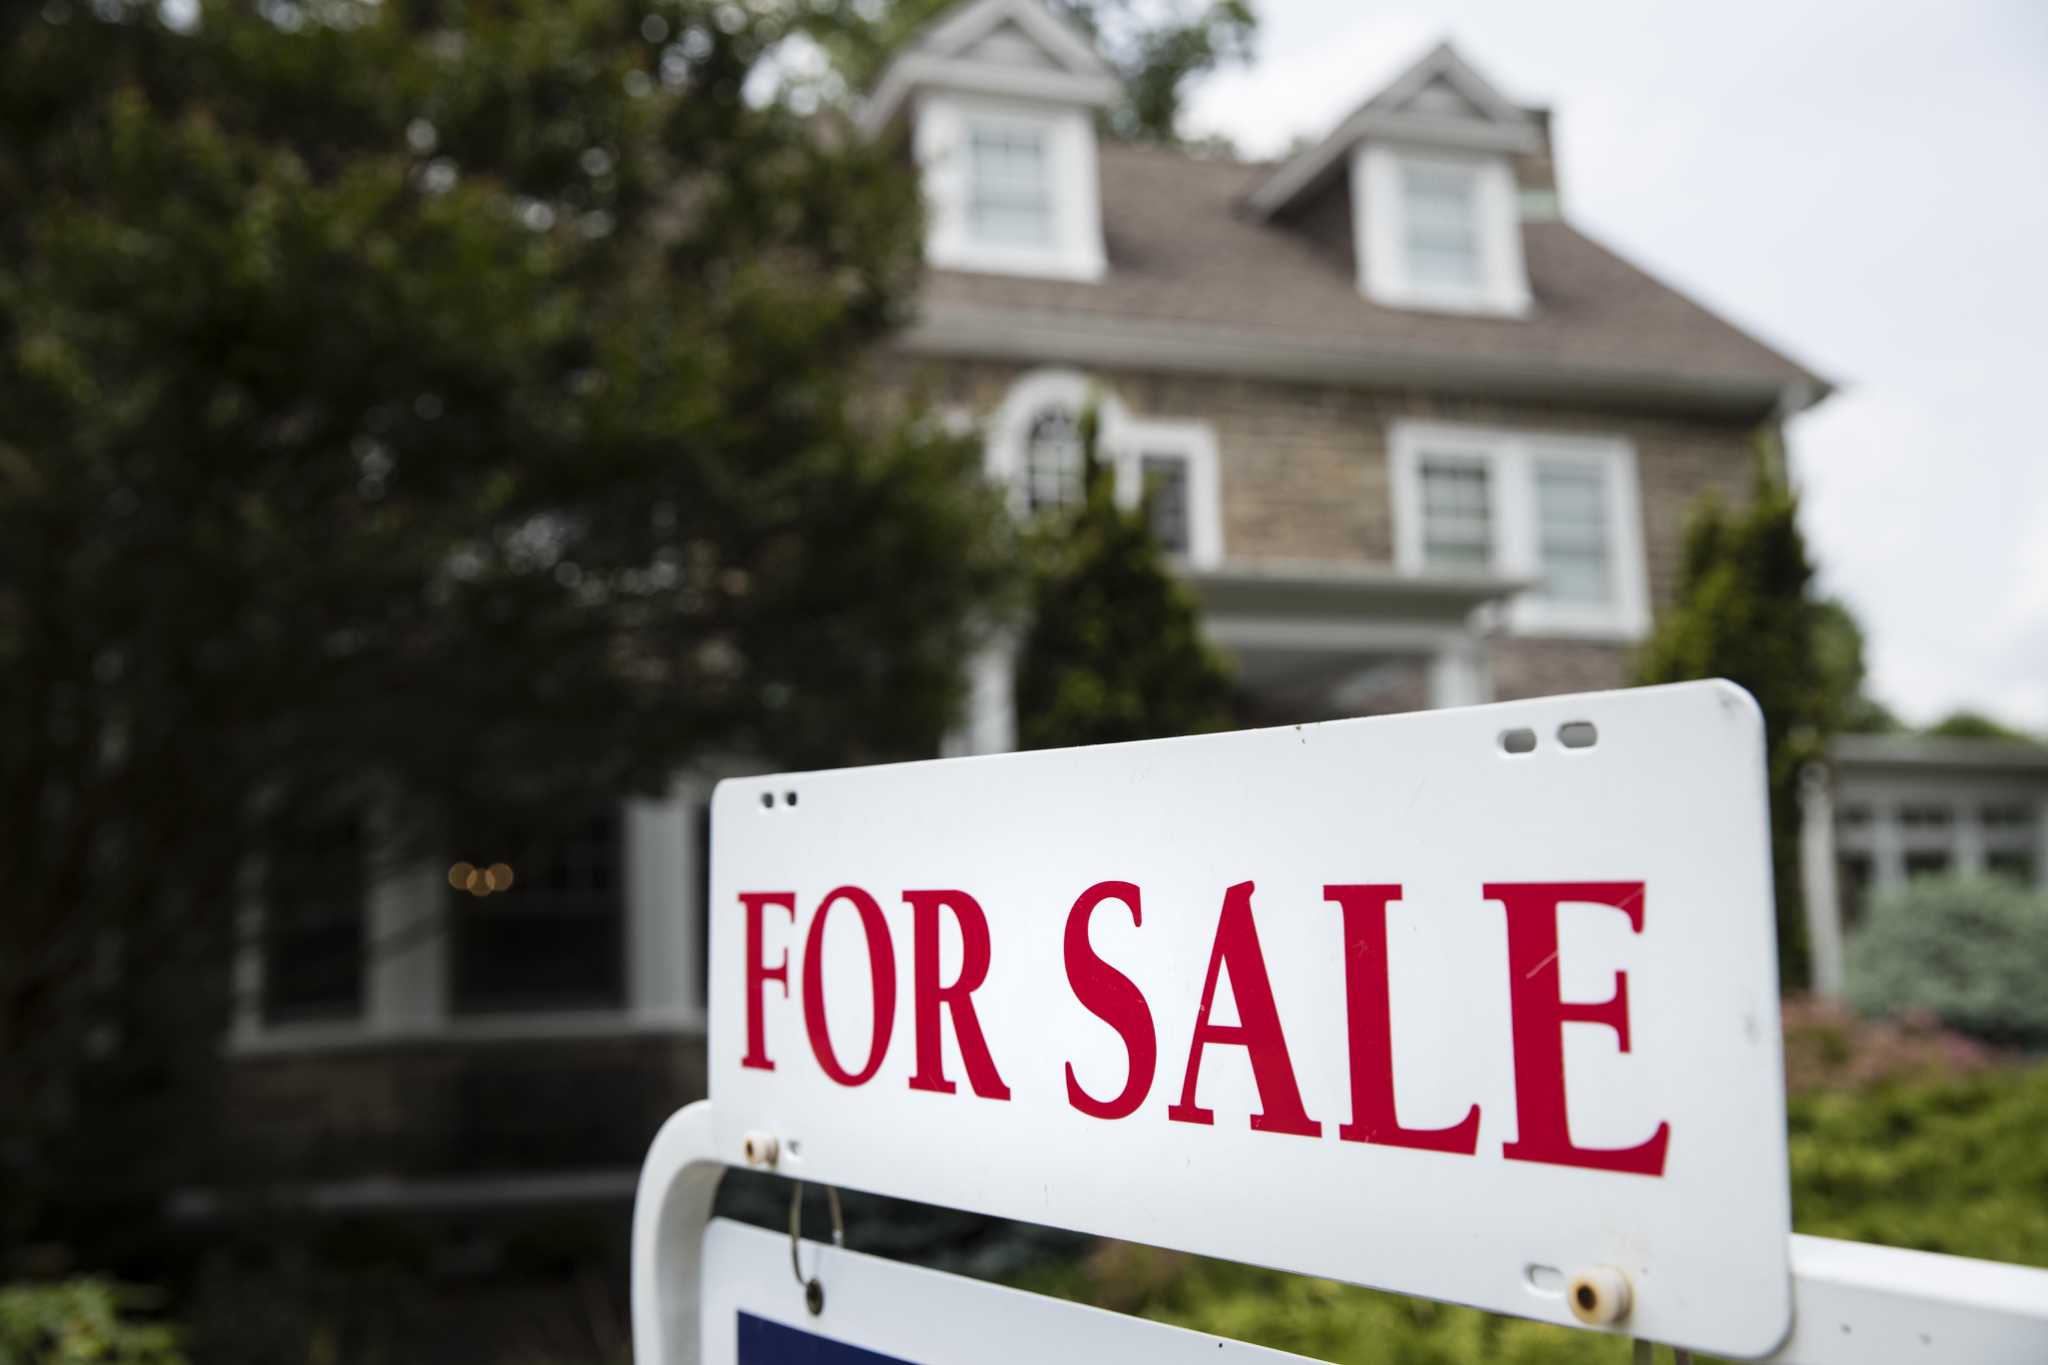 San Antonio Area Home Sales And Prices Rise As Supply Falls To A Record Low